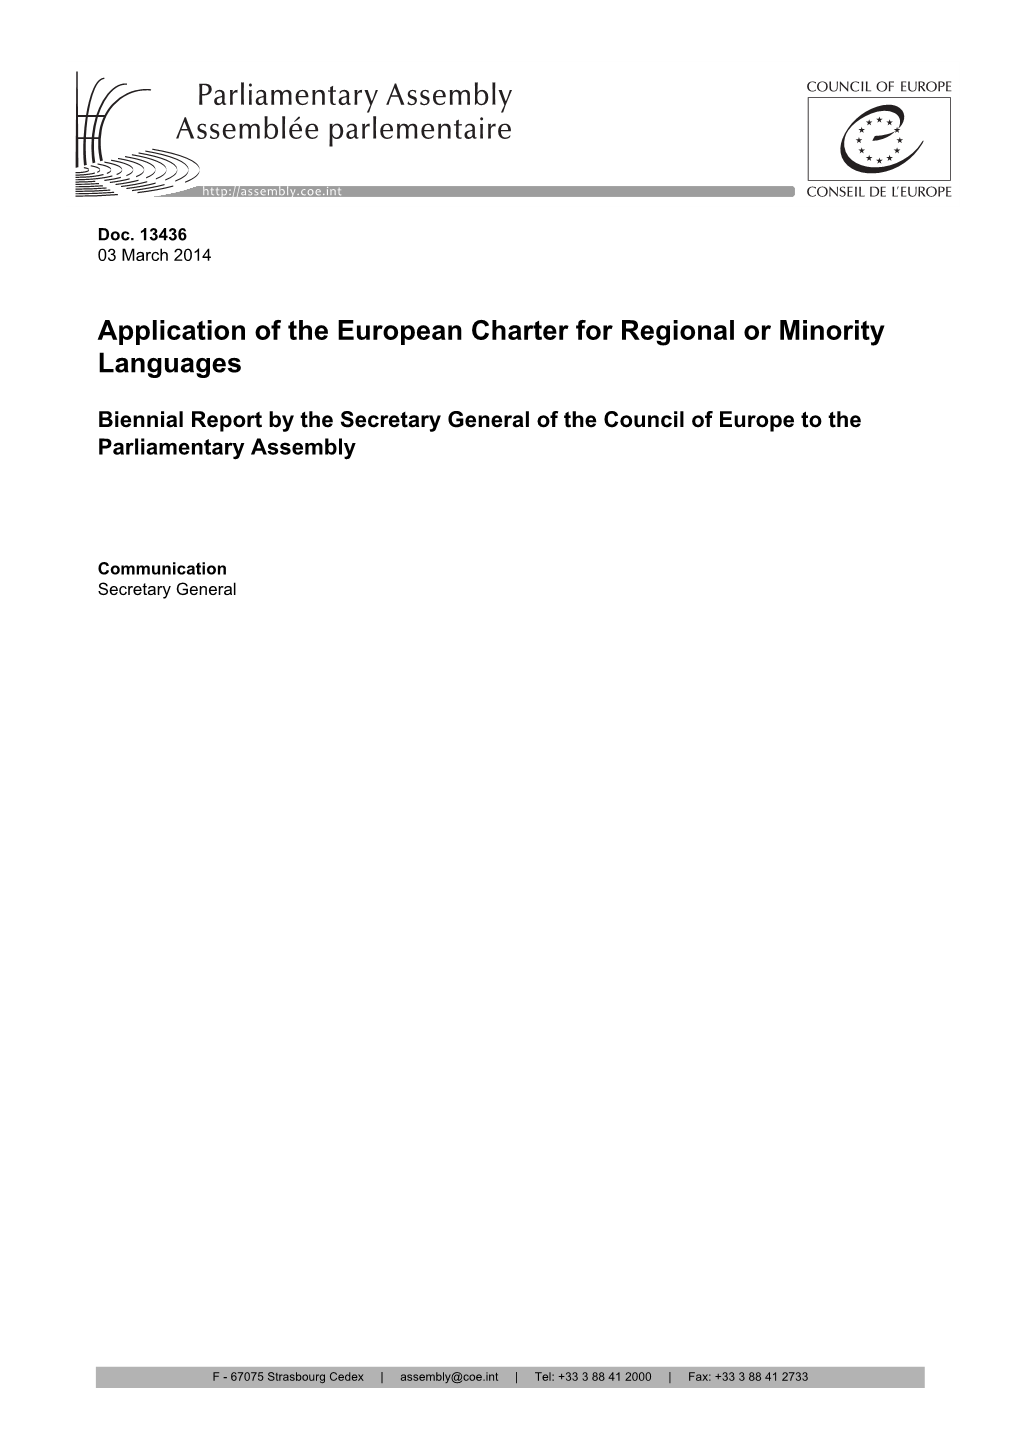 Application of the European Charter for Regional Or Minority Languages